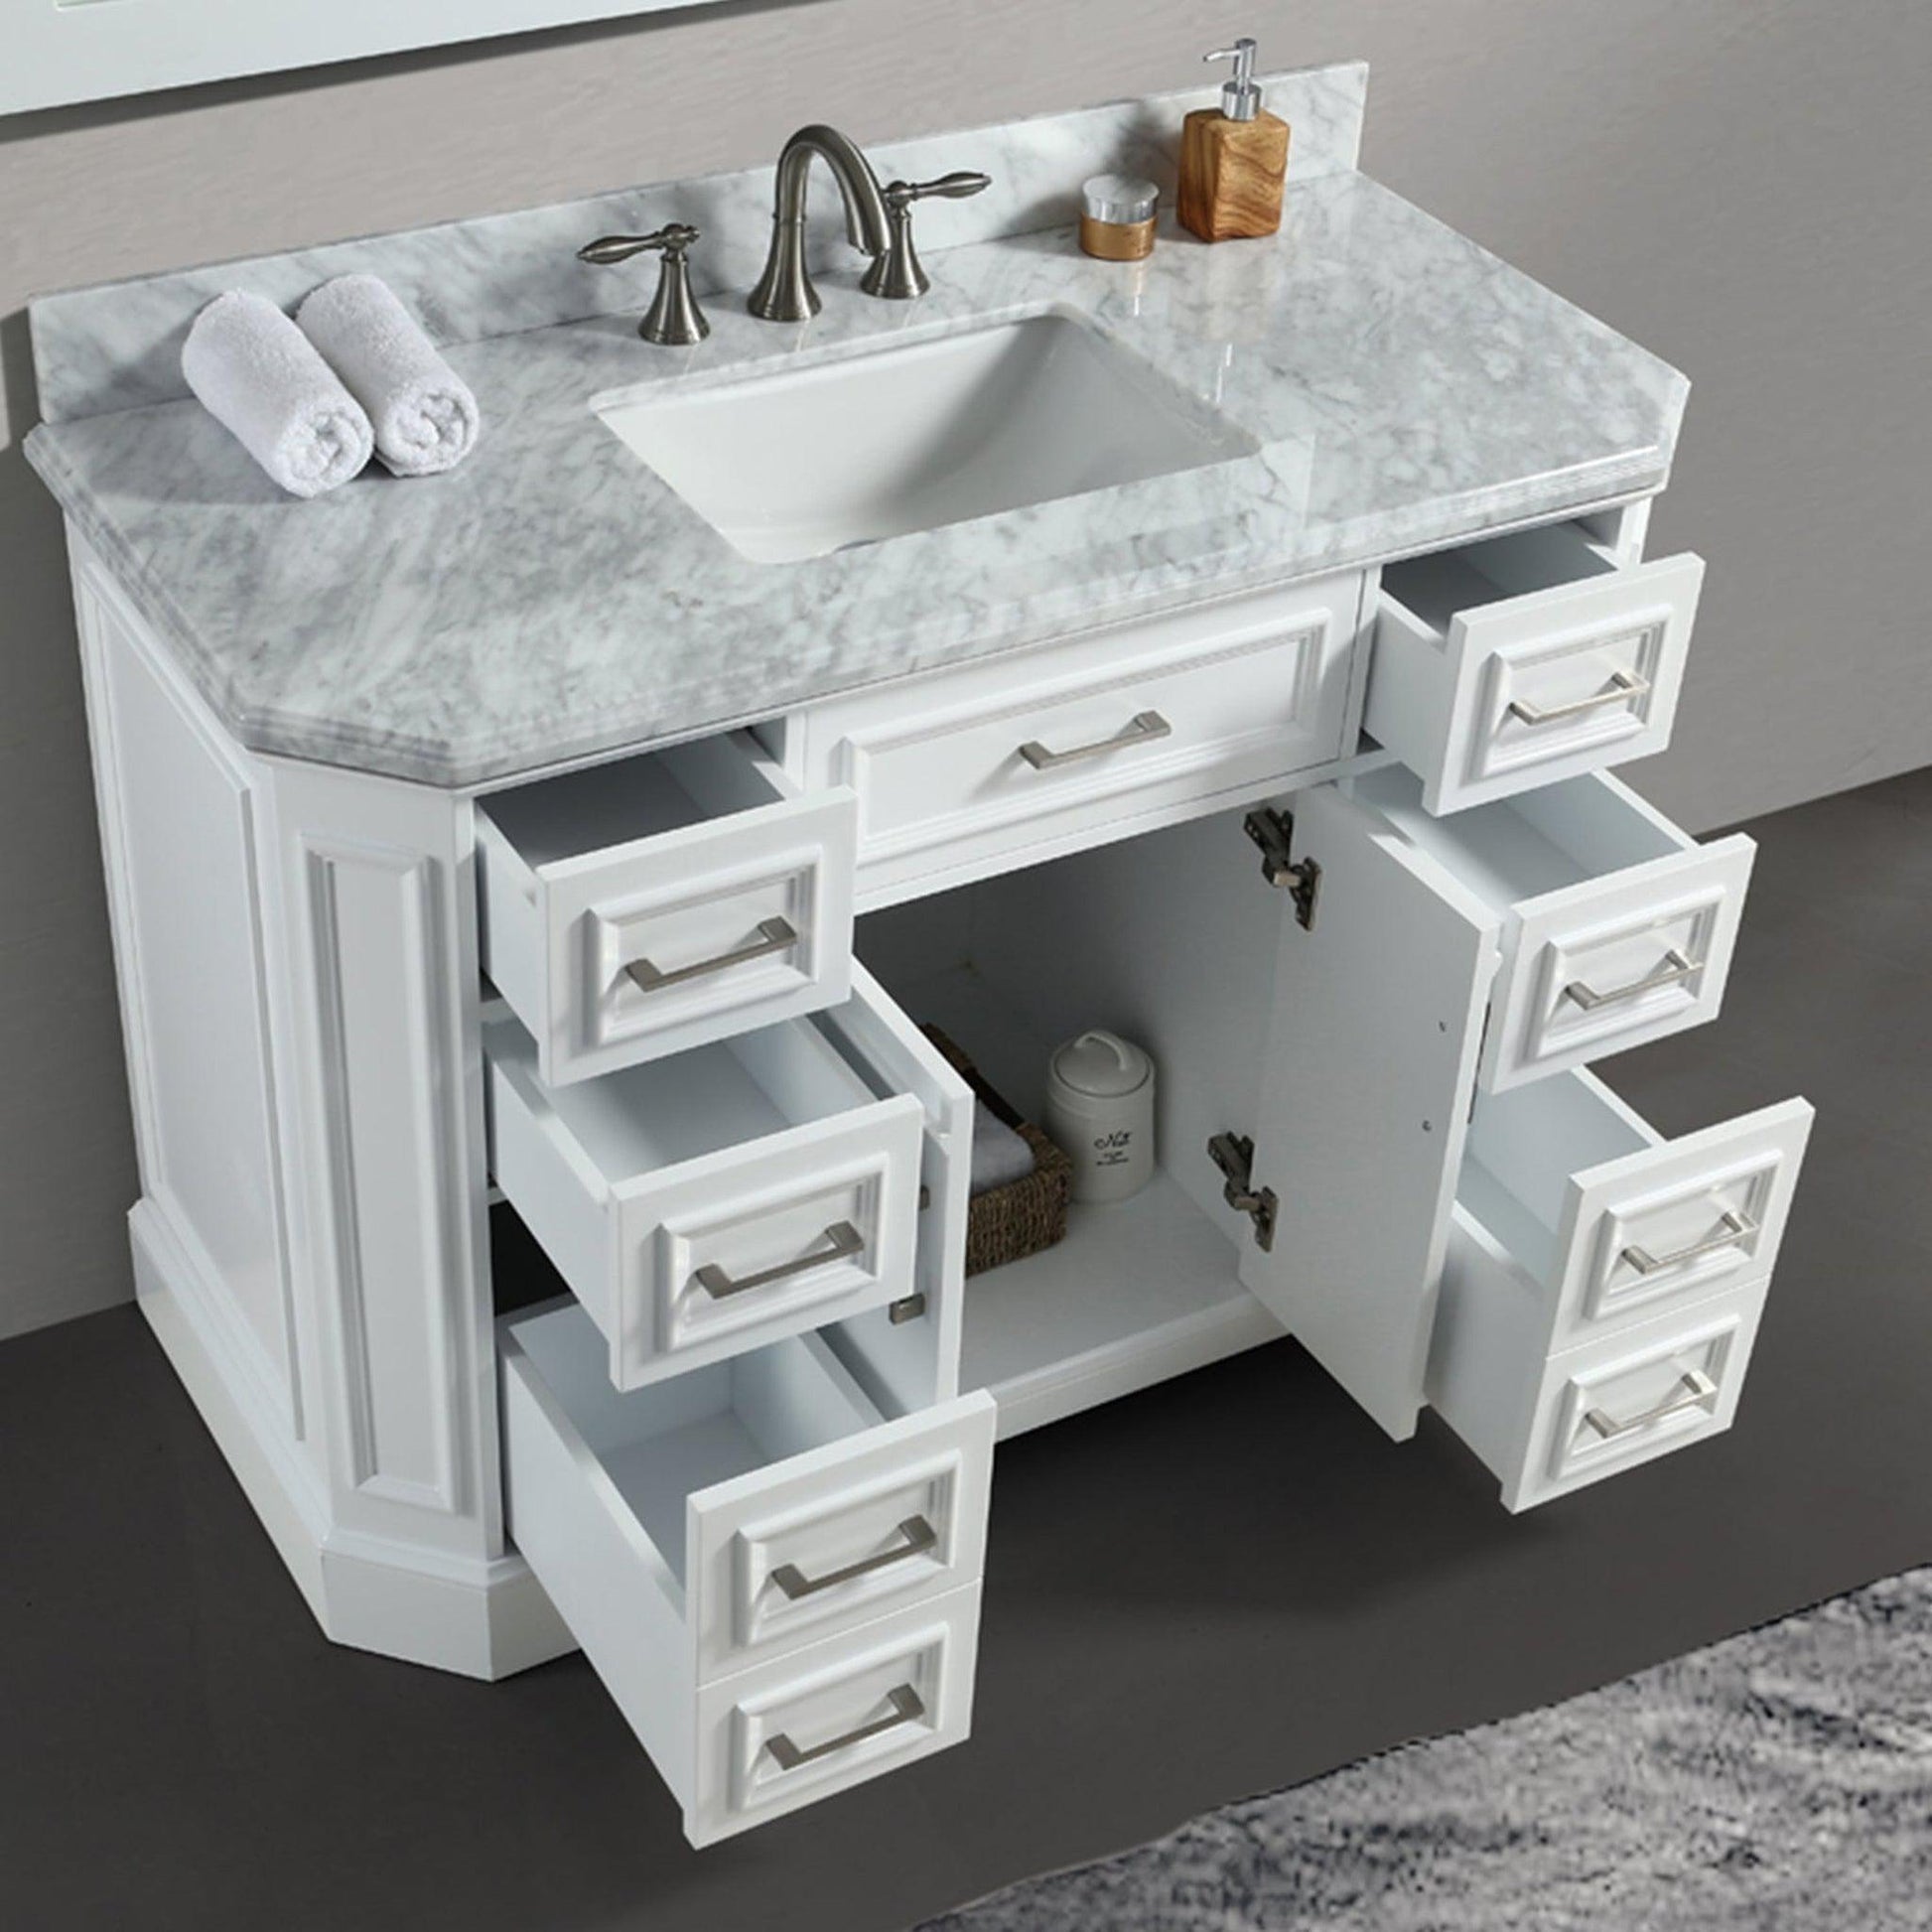 Eviva Glory 48" x 33" White Bathroom Vanity With Carrara Marble Countertop and Single Porcelain Sink